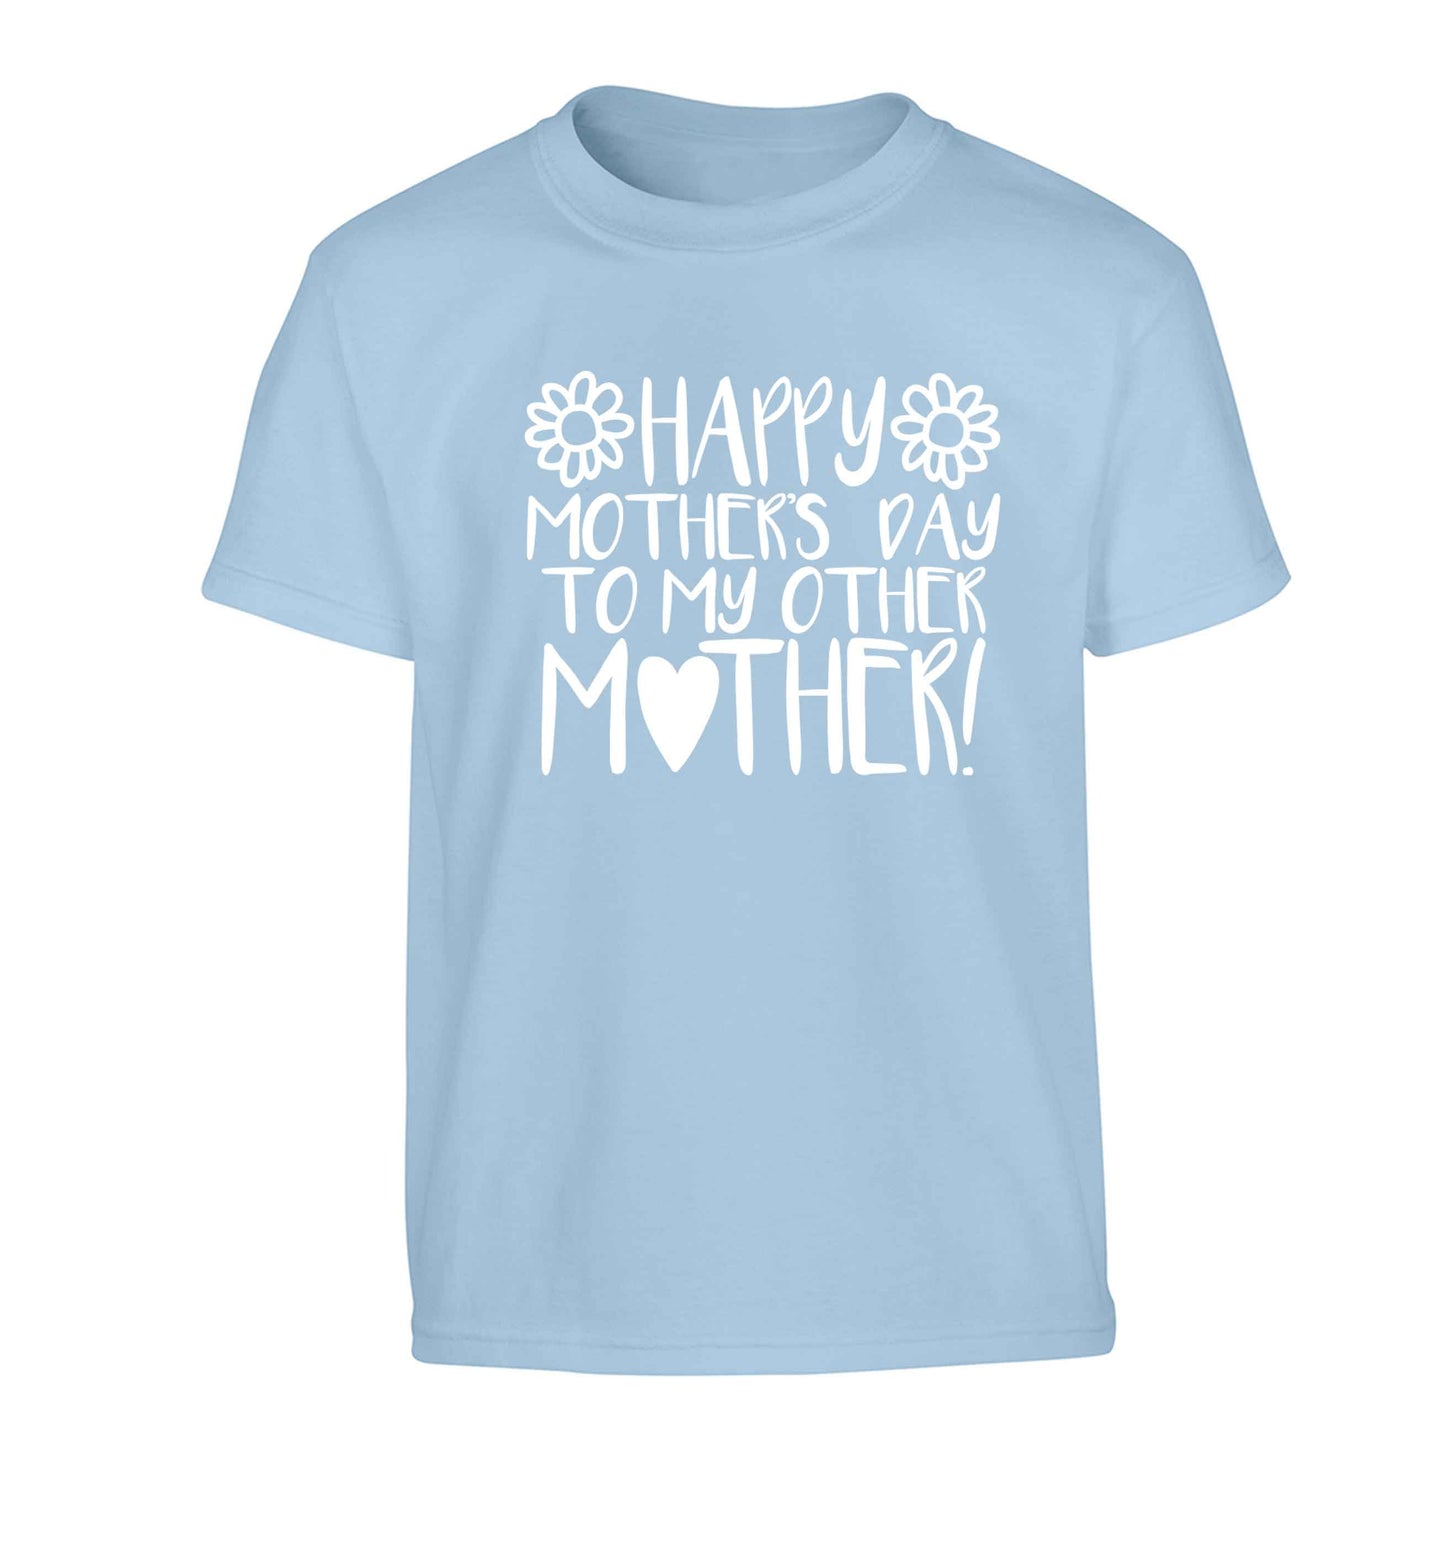 Happy mother's day to my other mother Children's light blue Tshirt 12-13 Years